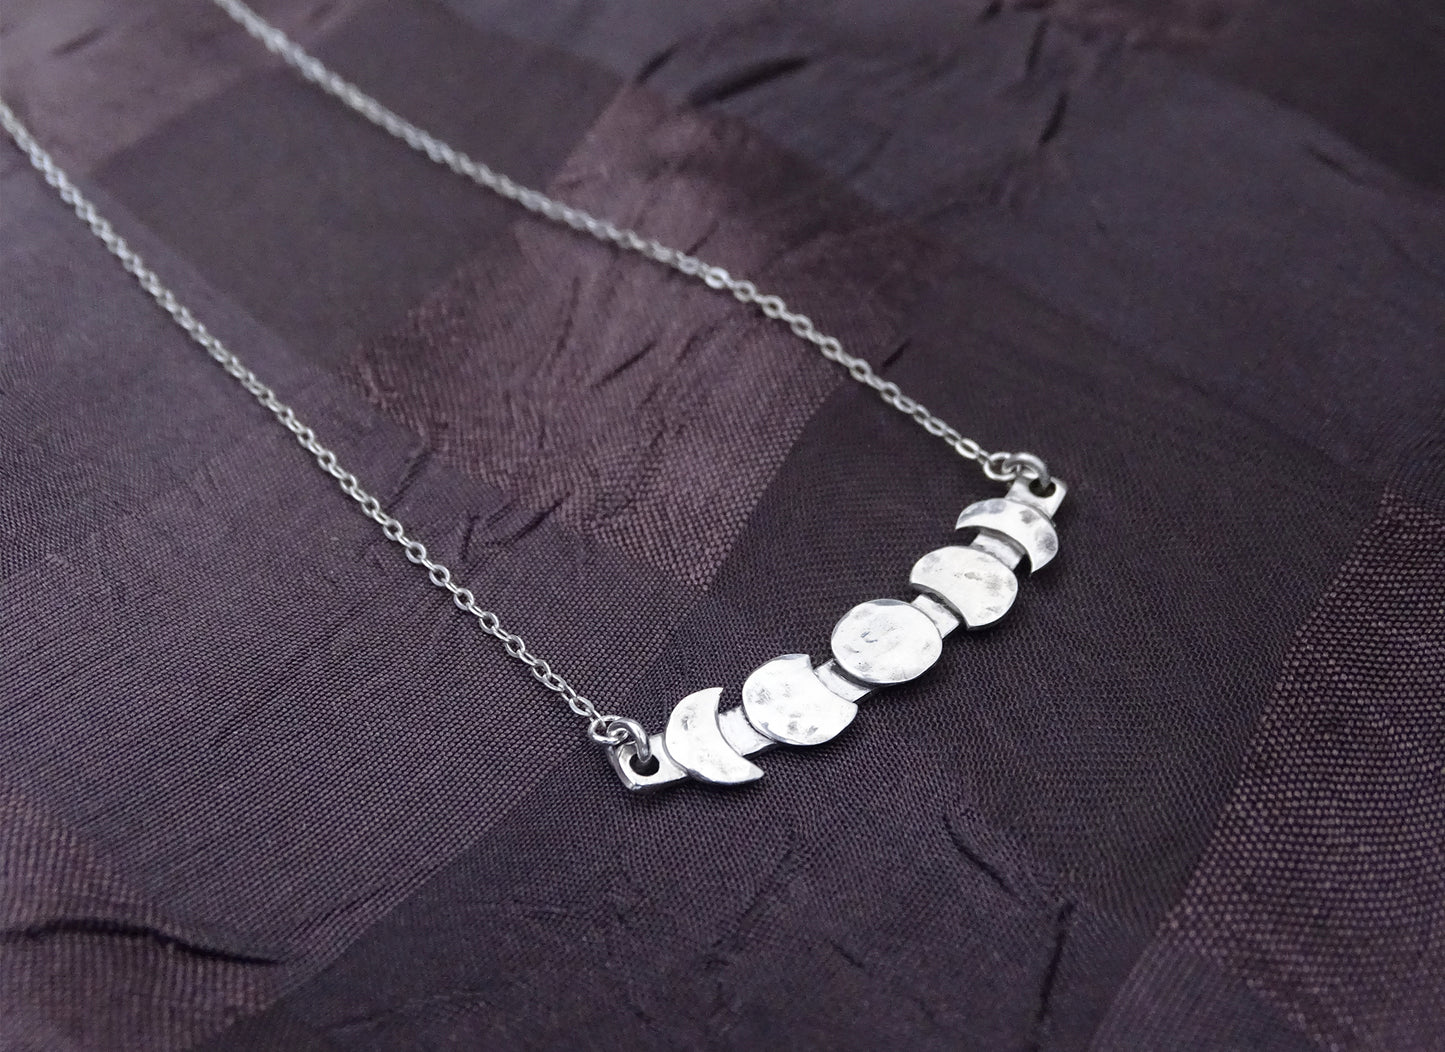 Moon Phase Necklace Sterling Silver